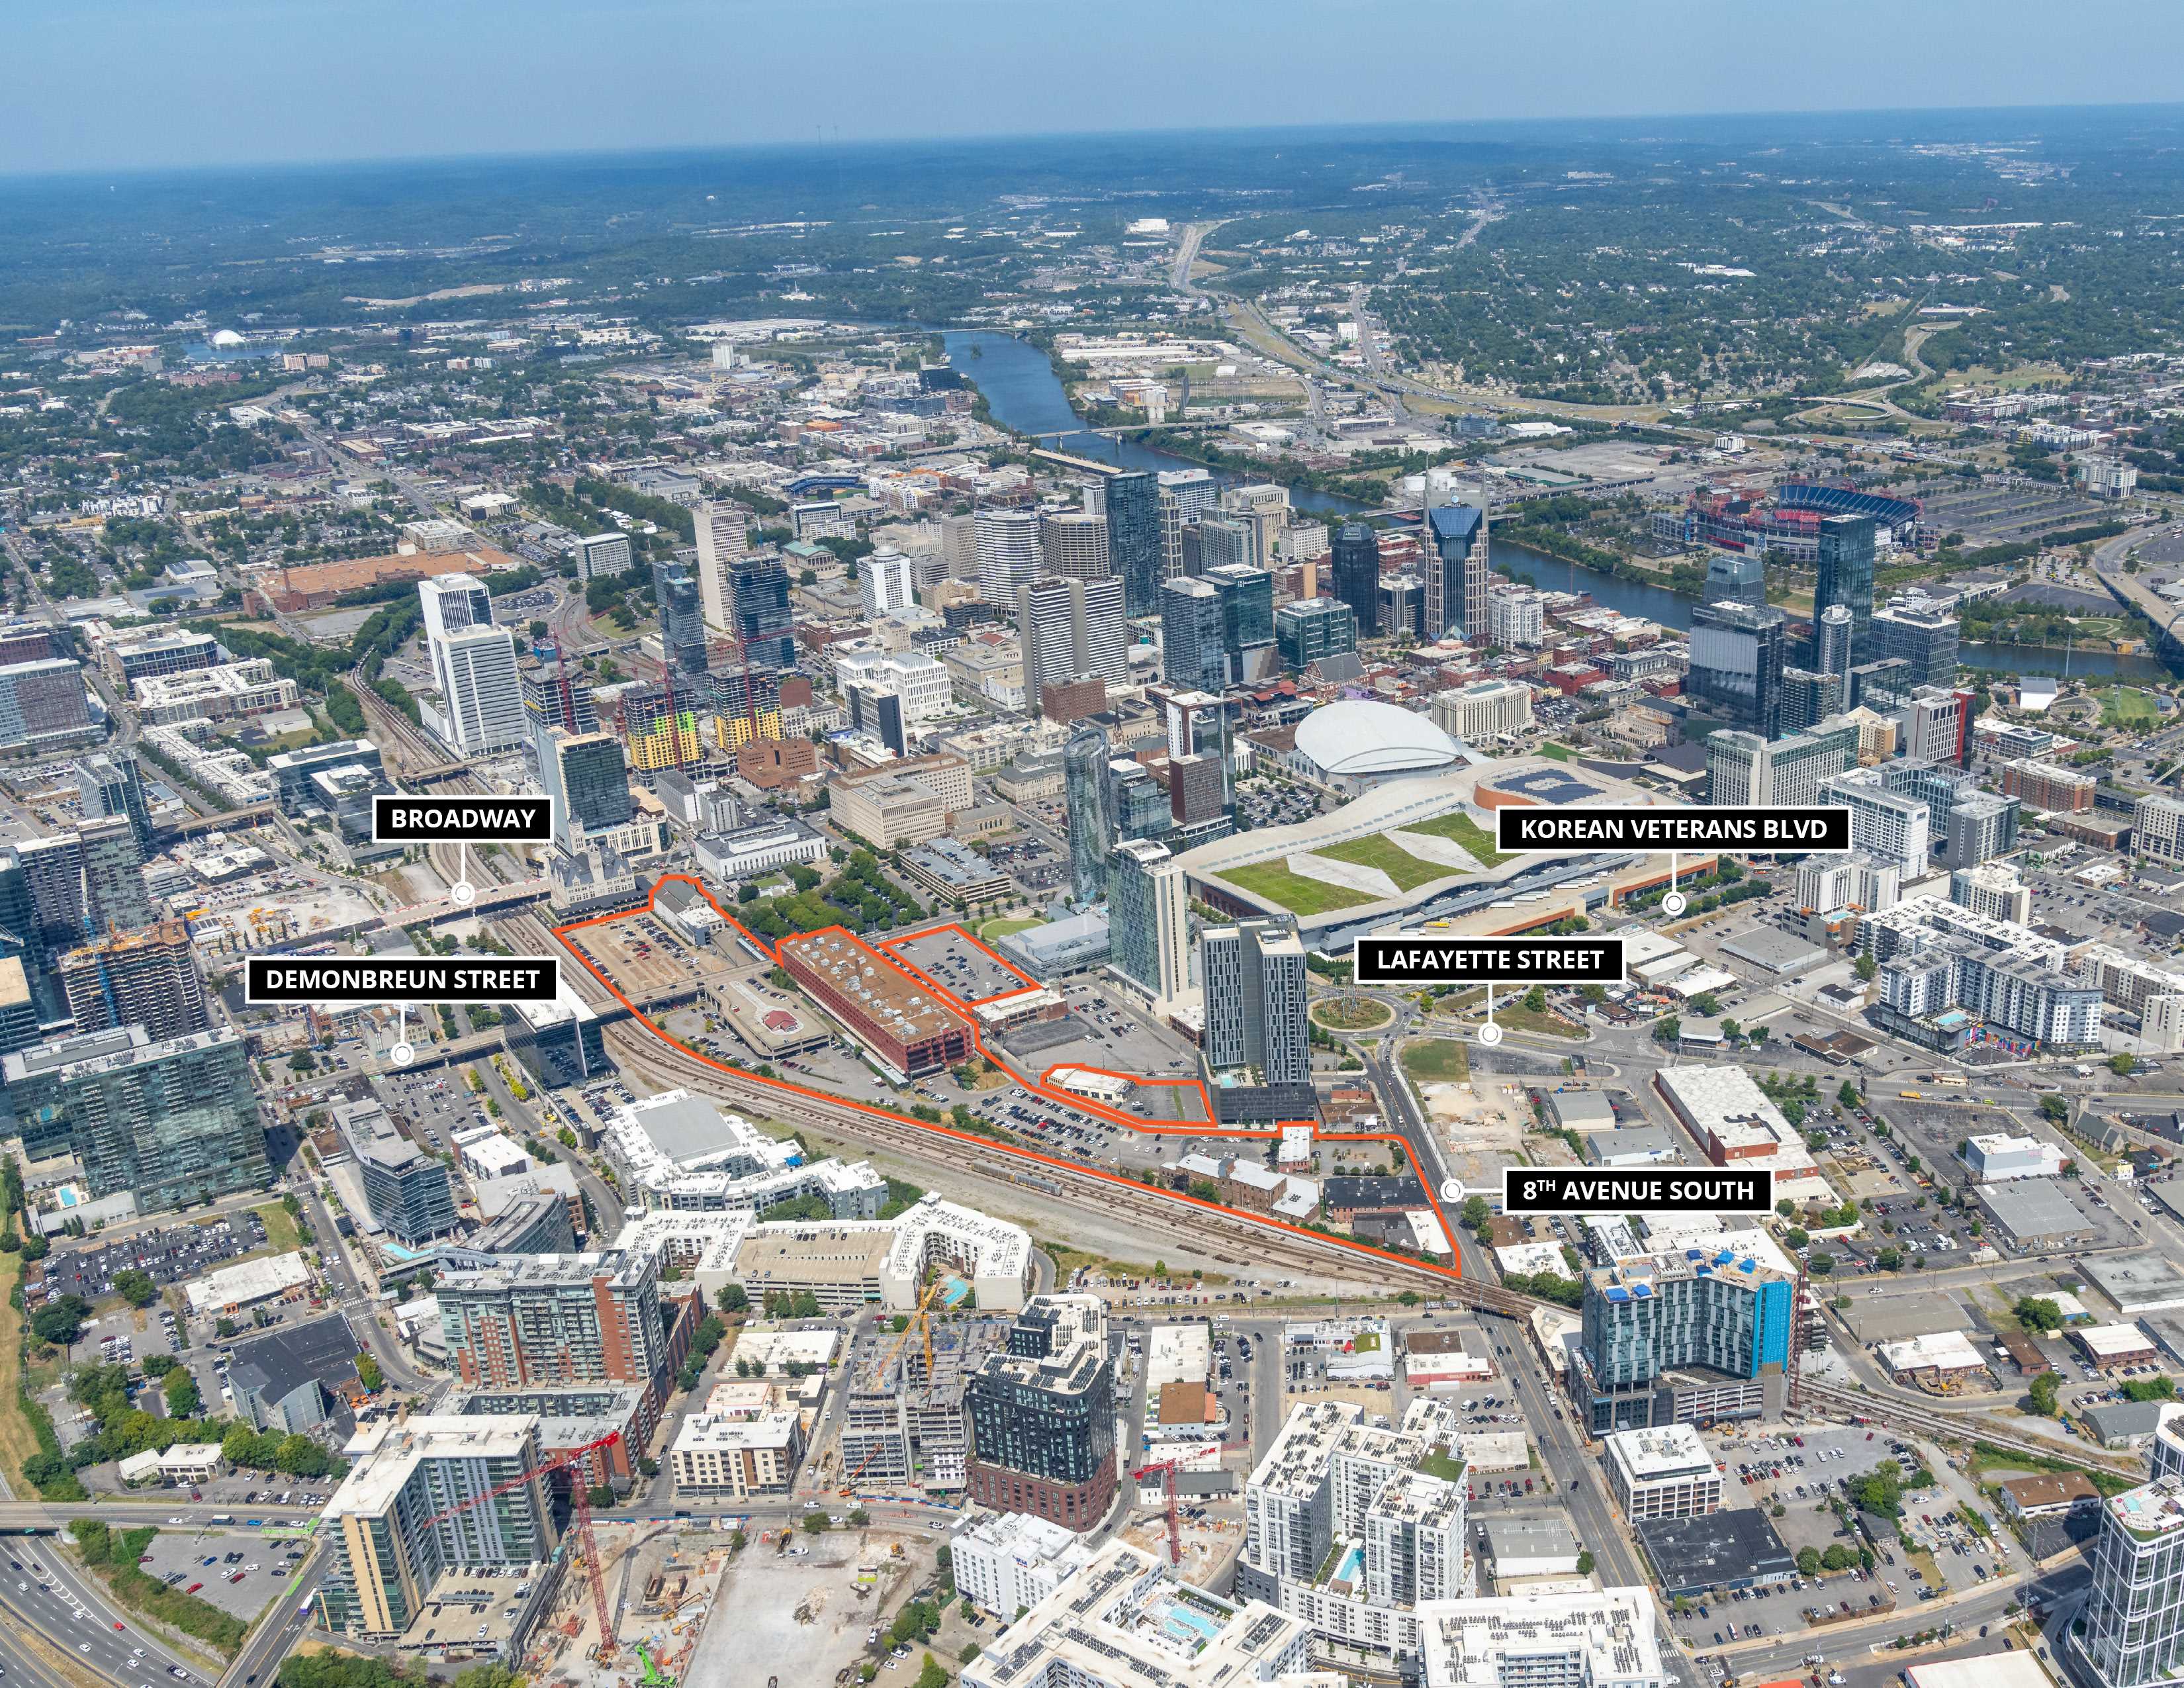 station district development opportunity in Nashville led by Avison Young capital markets services